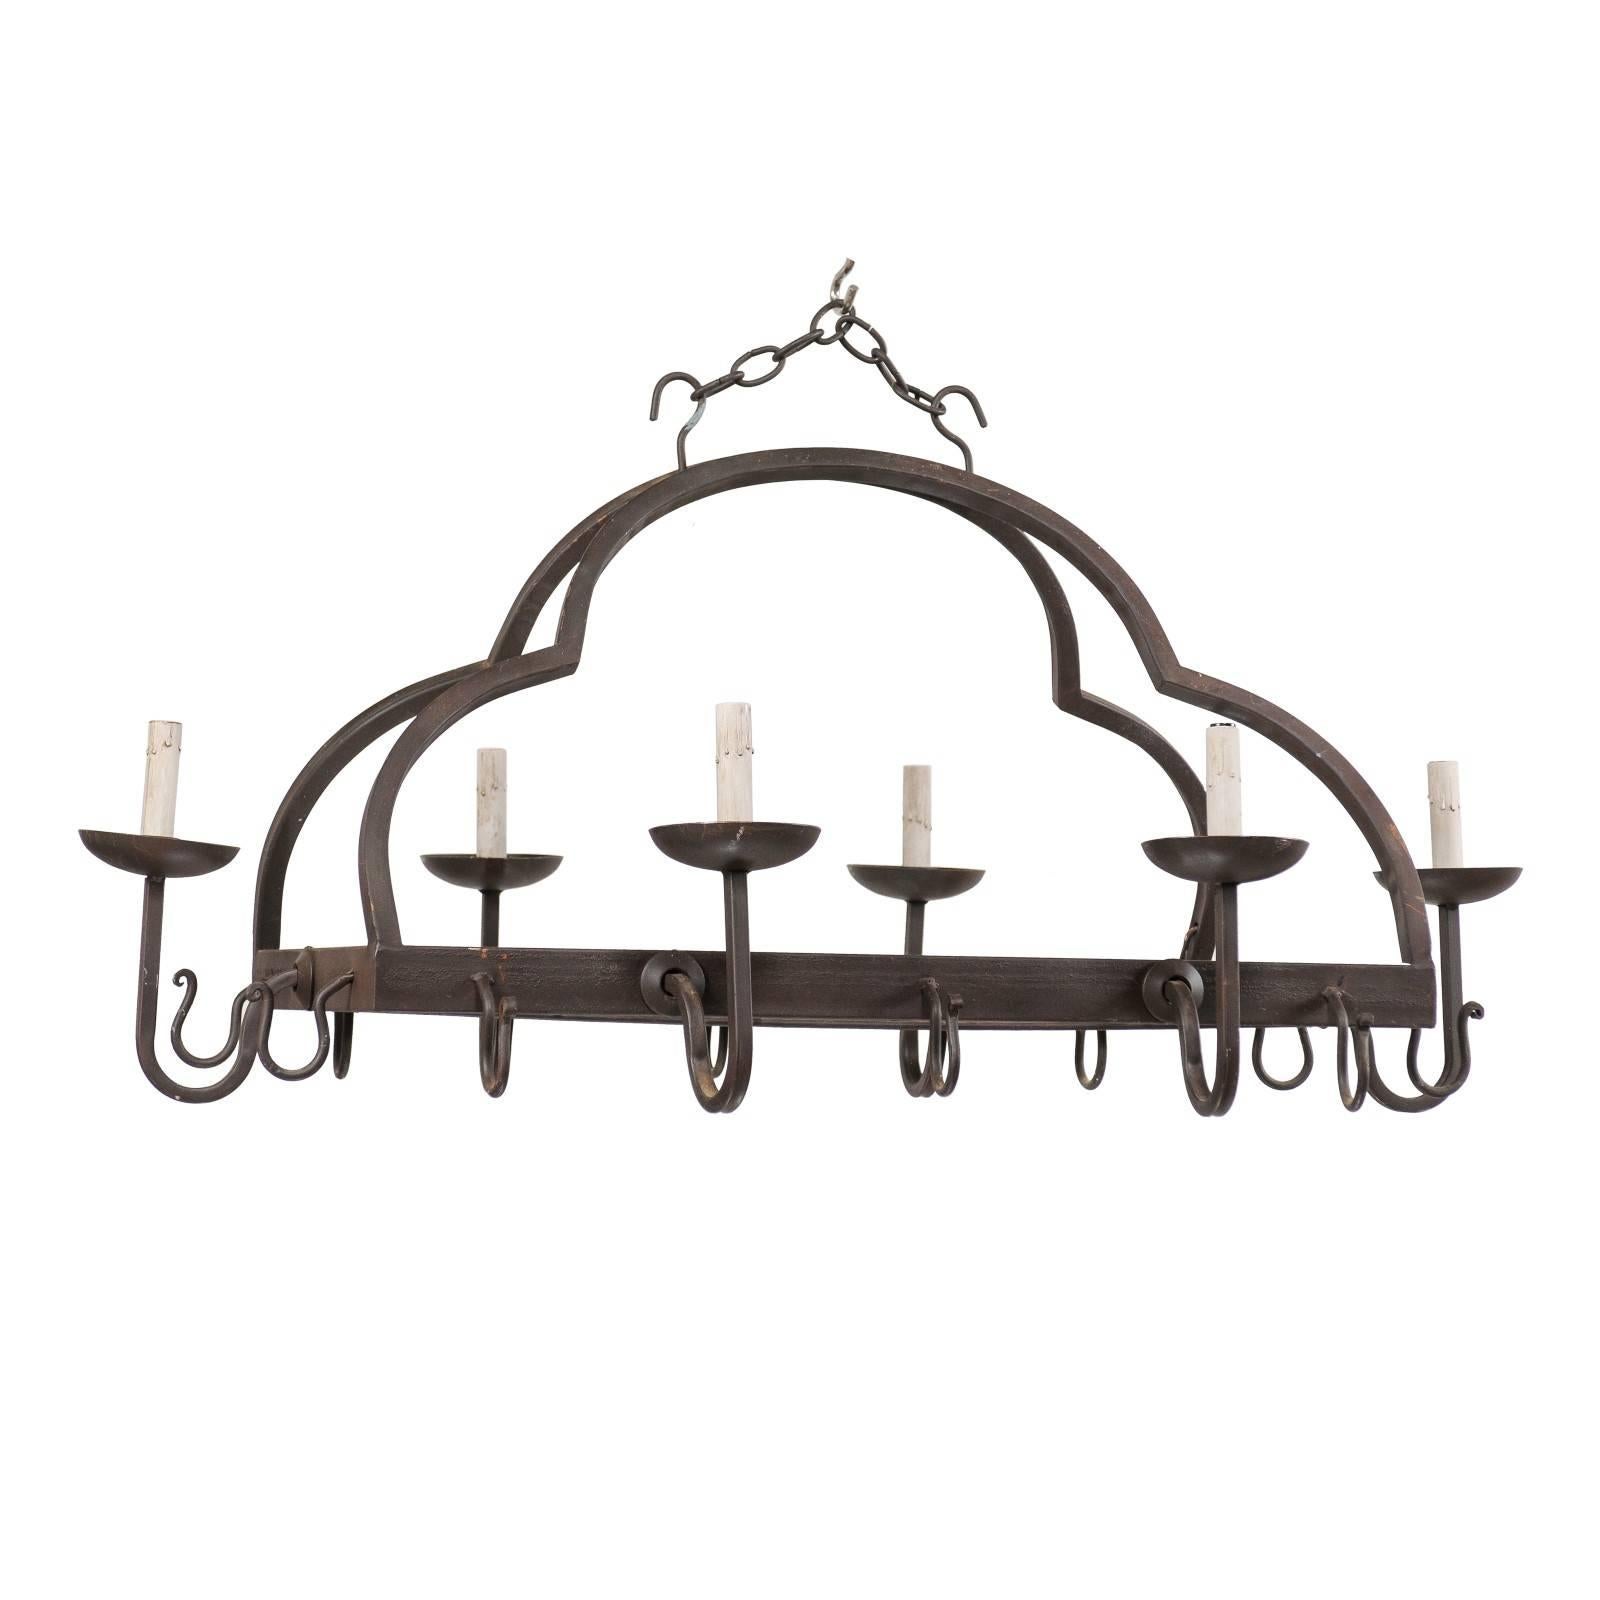 French Mid-20th Century Forged Iron Chandelier with Nicely Flowing Arch Design